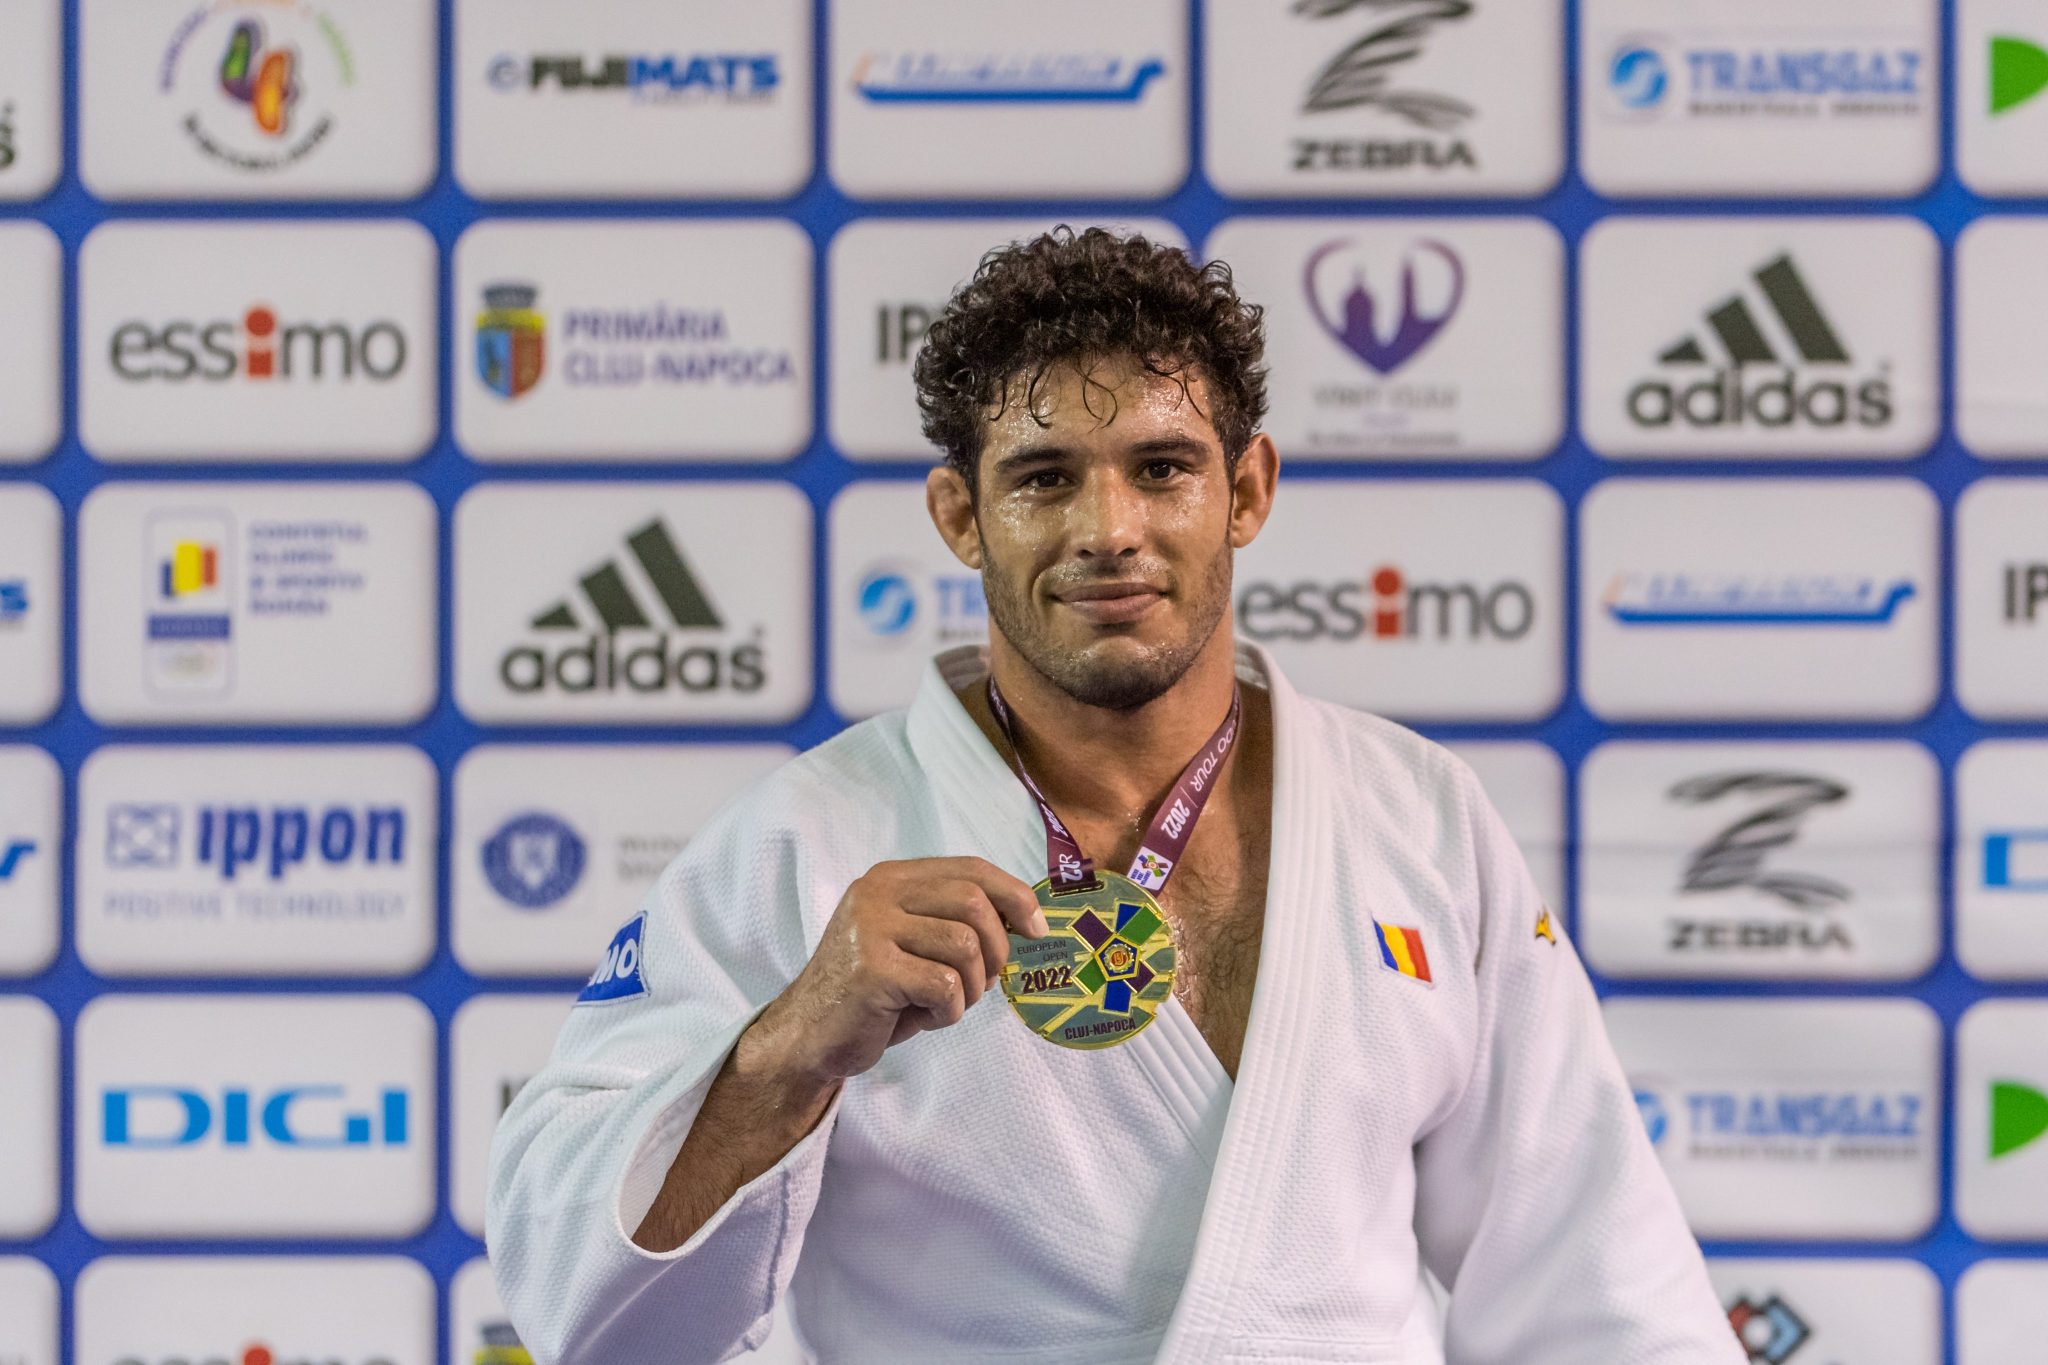 GONZALEZ TAKES GOLD ON SECOND DAY